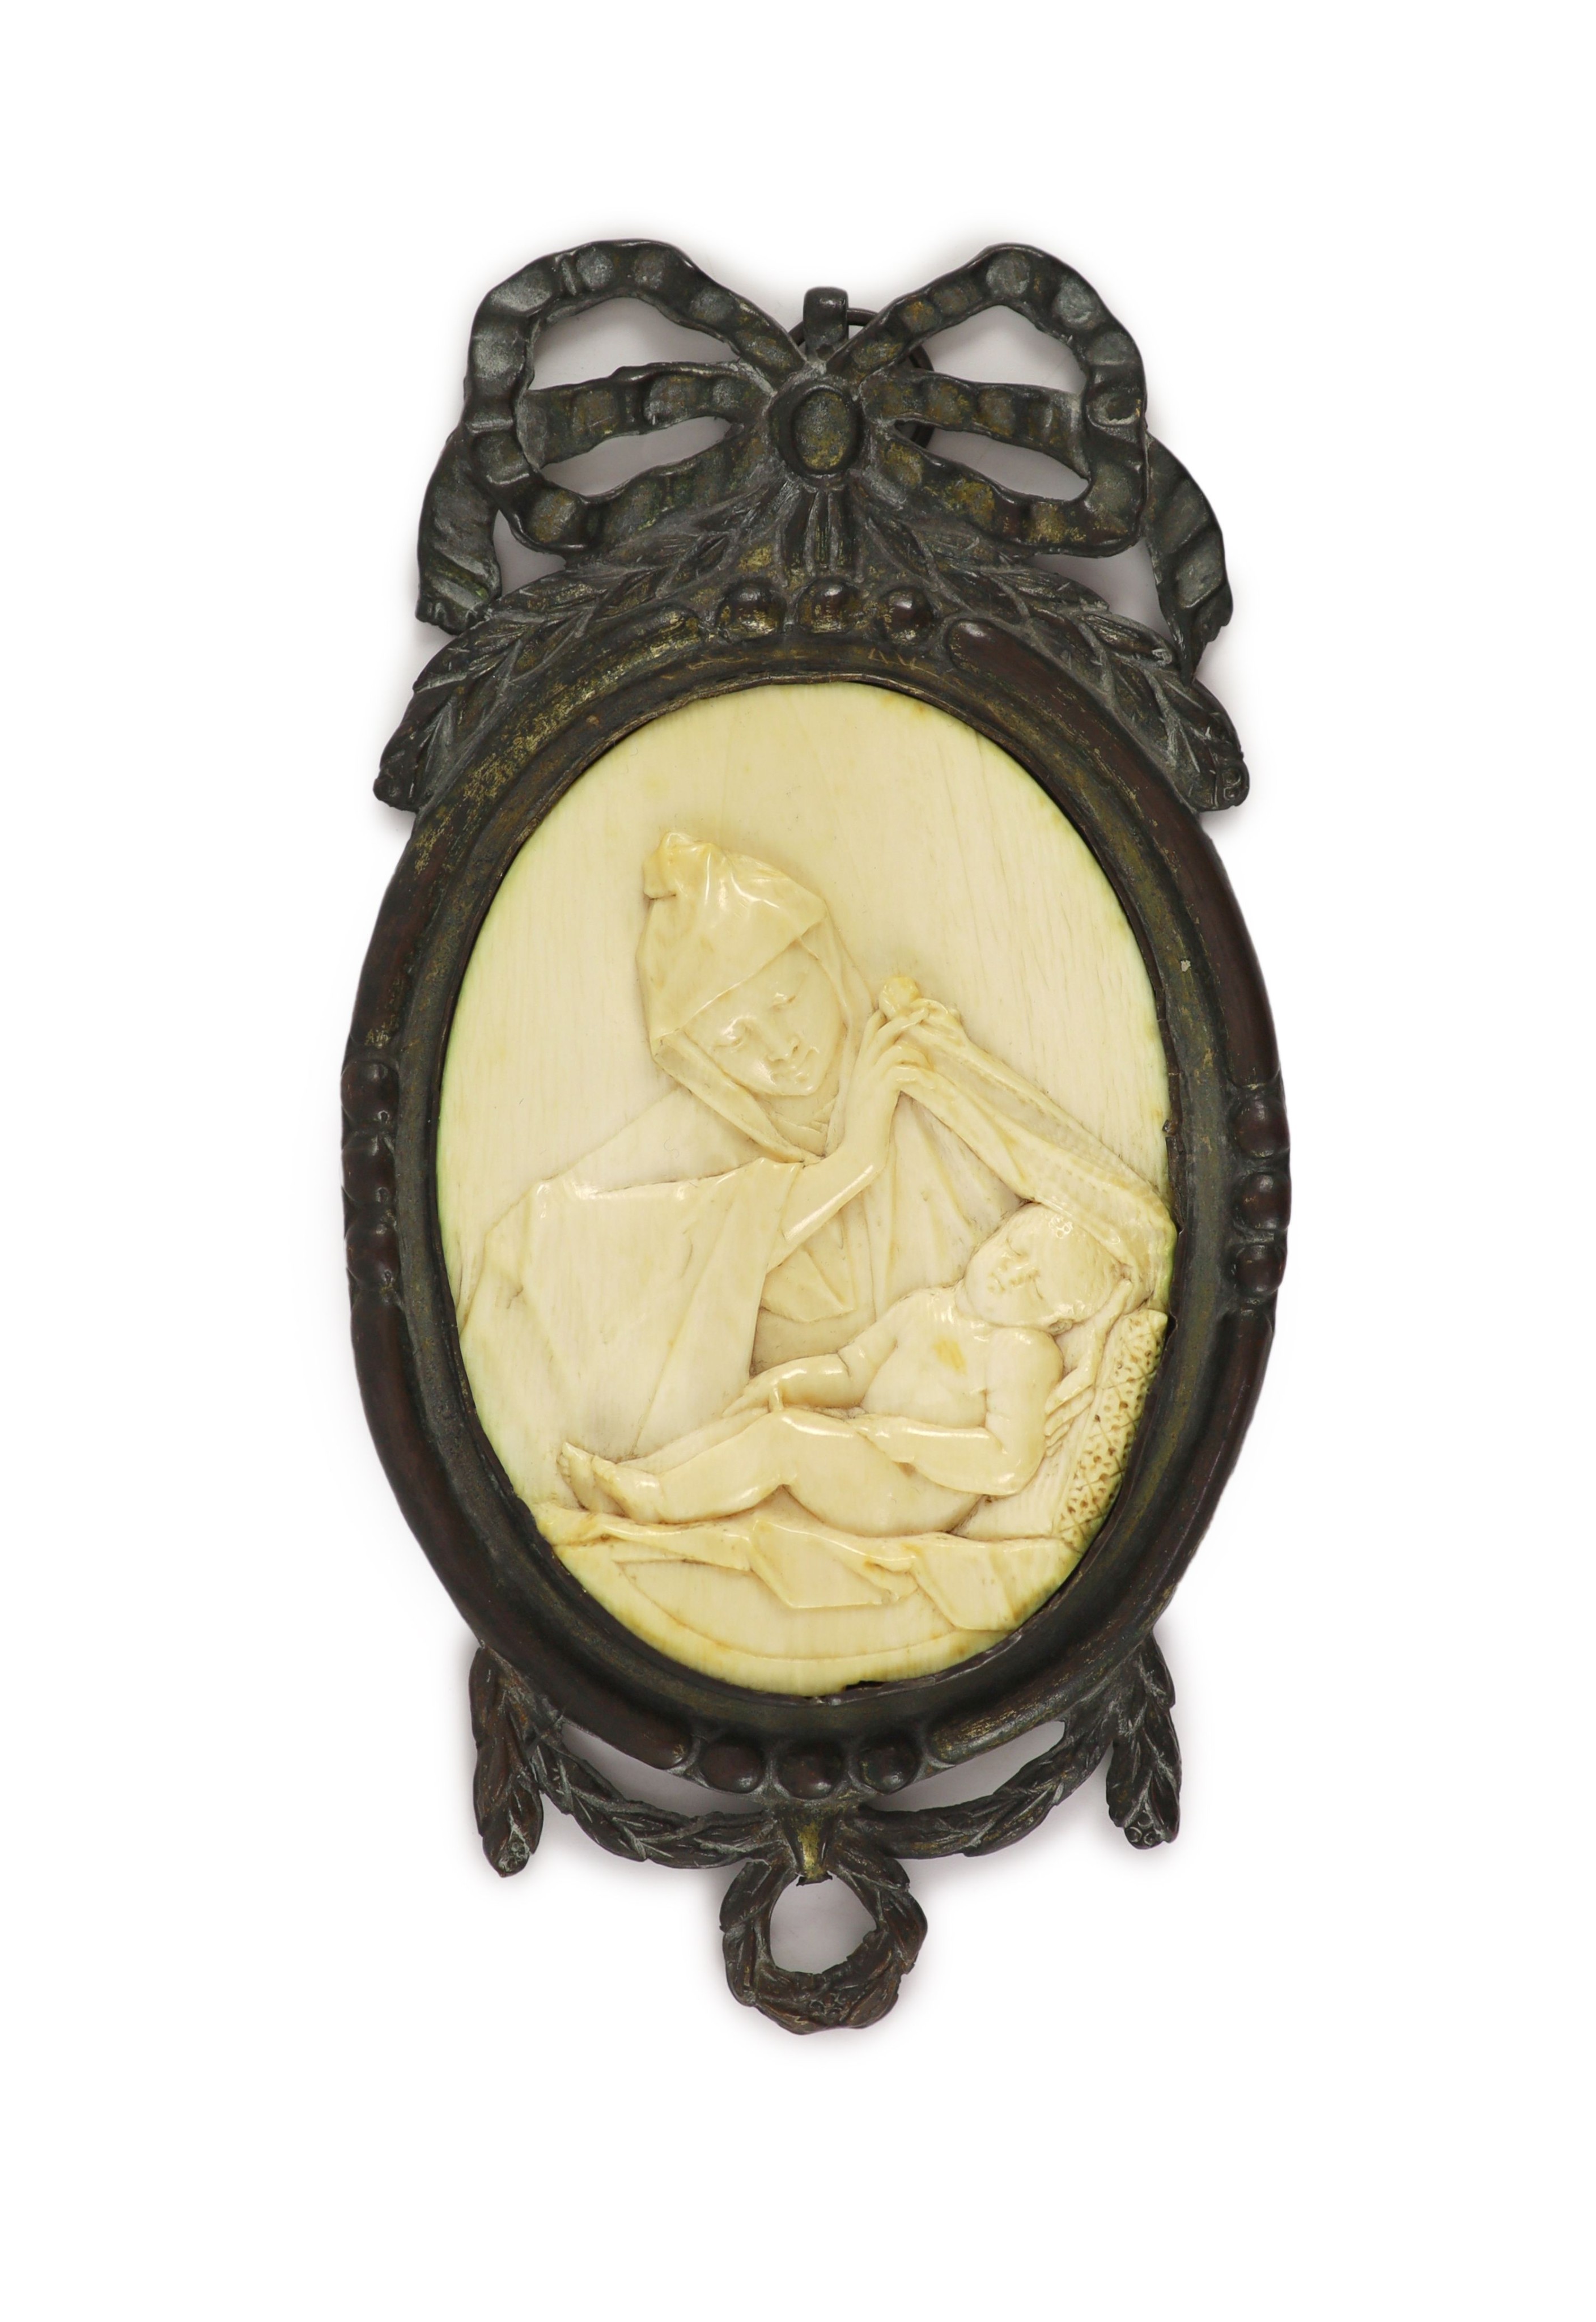 In the manner of Jurgen Kriebel (1580-1645), a relief carved ivory plaque of the Madonna and child, in bronze frame Plaque 10.5 x 7.5cm, overall 19 x 10cm.